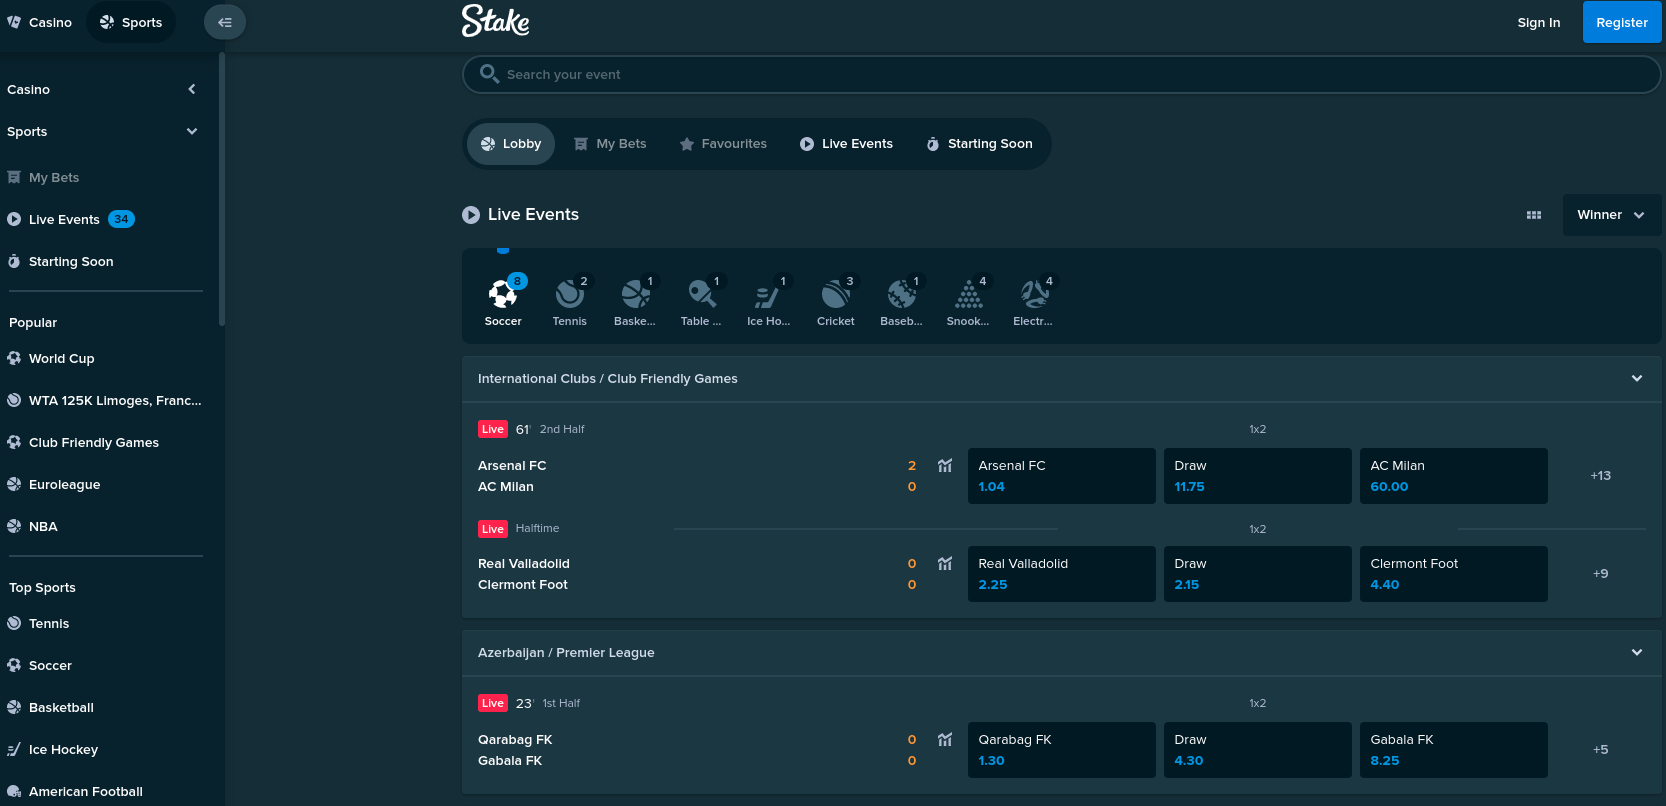 Stake Casino Live Events